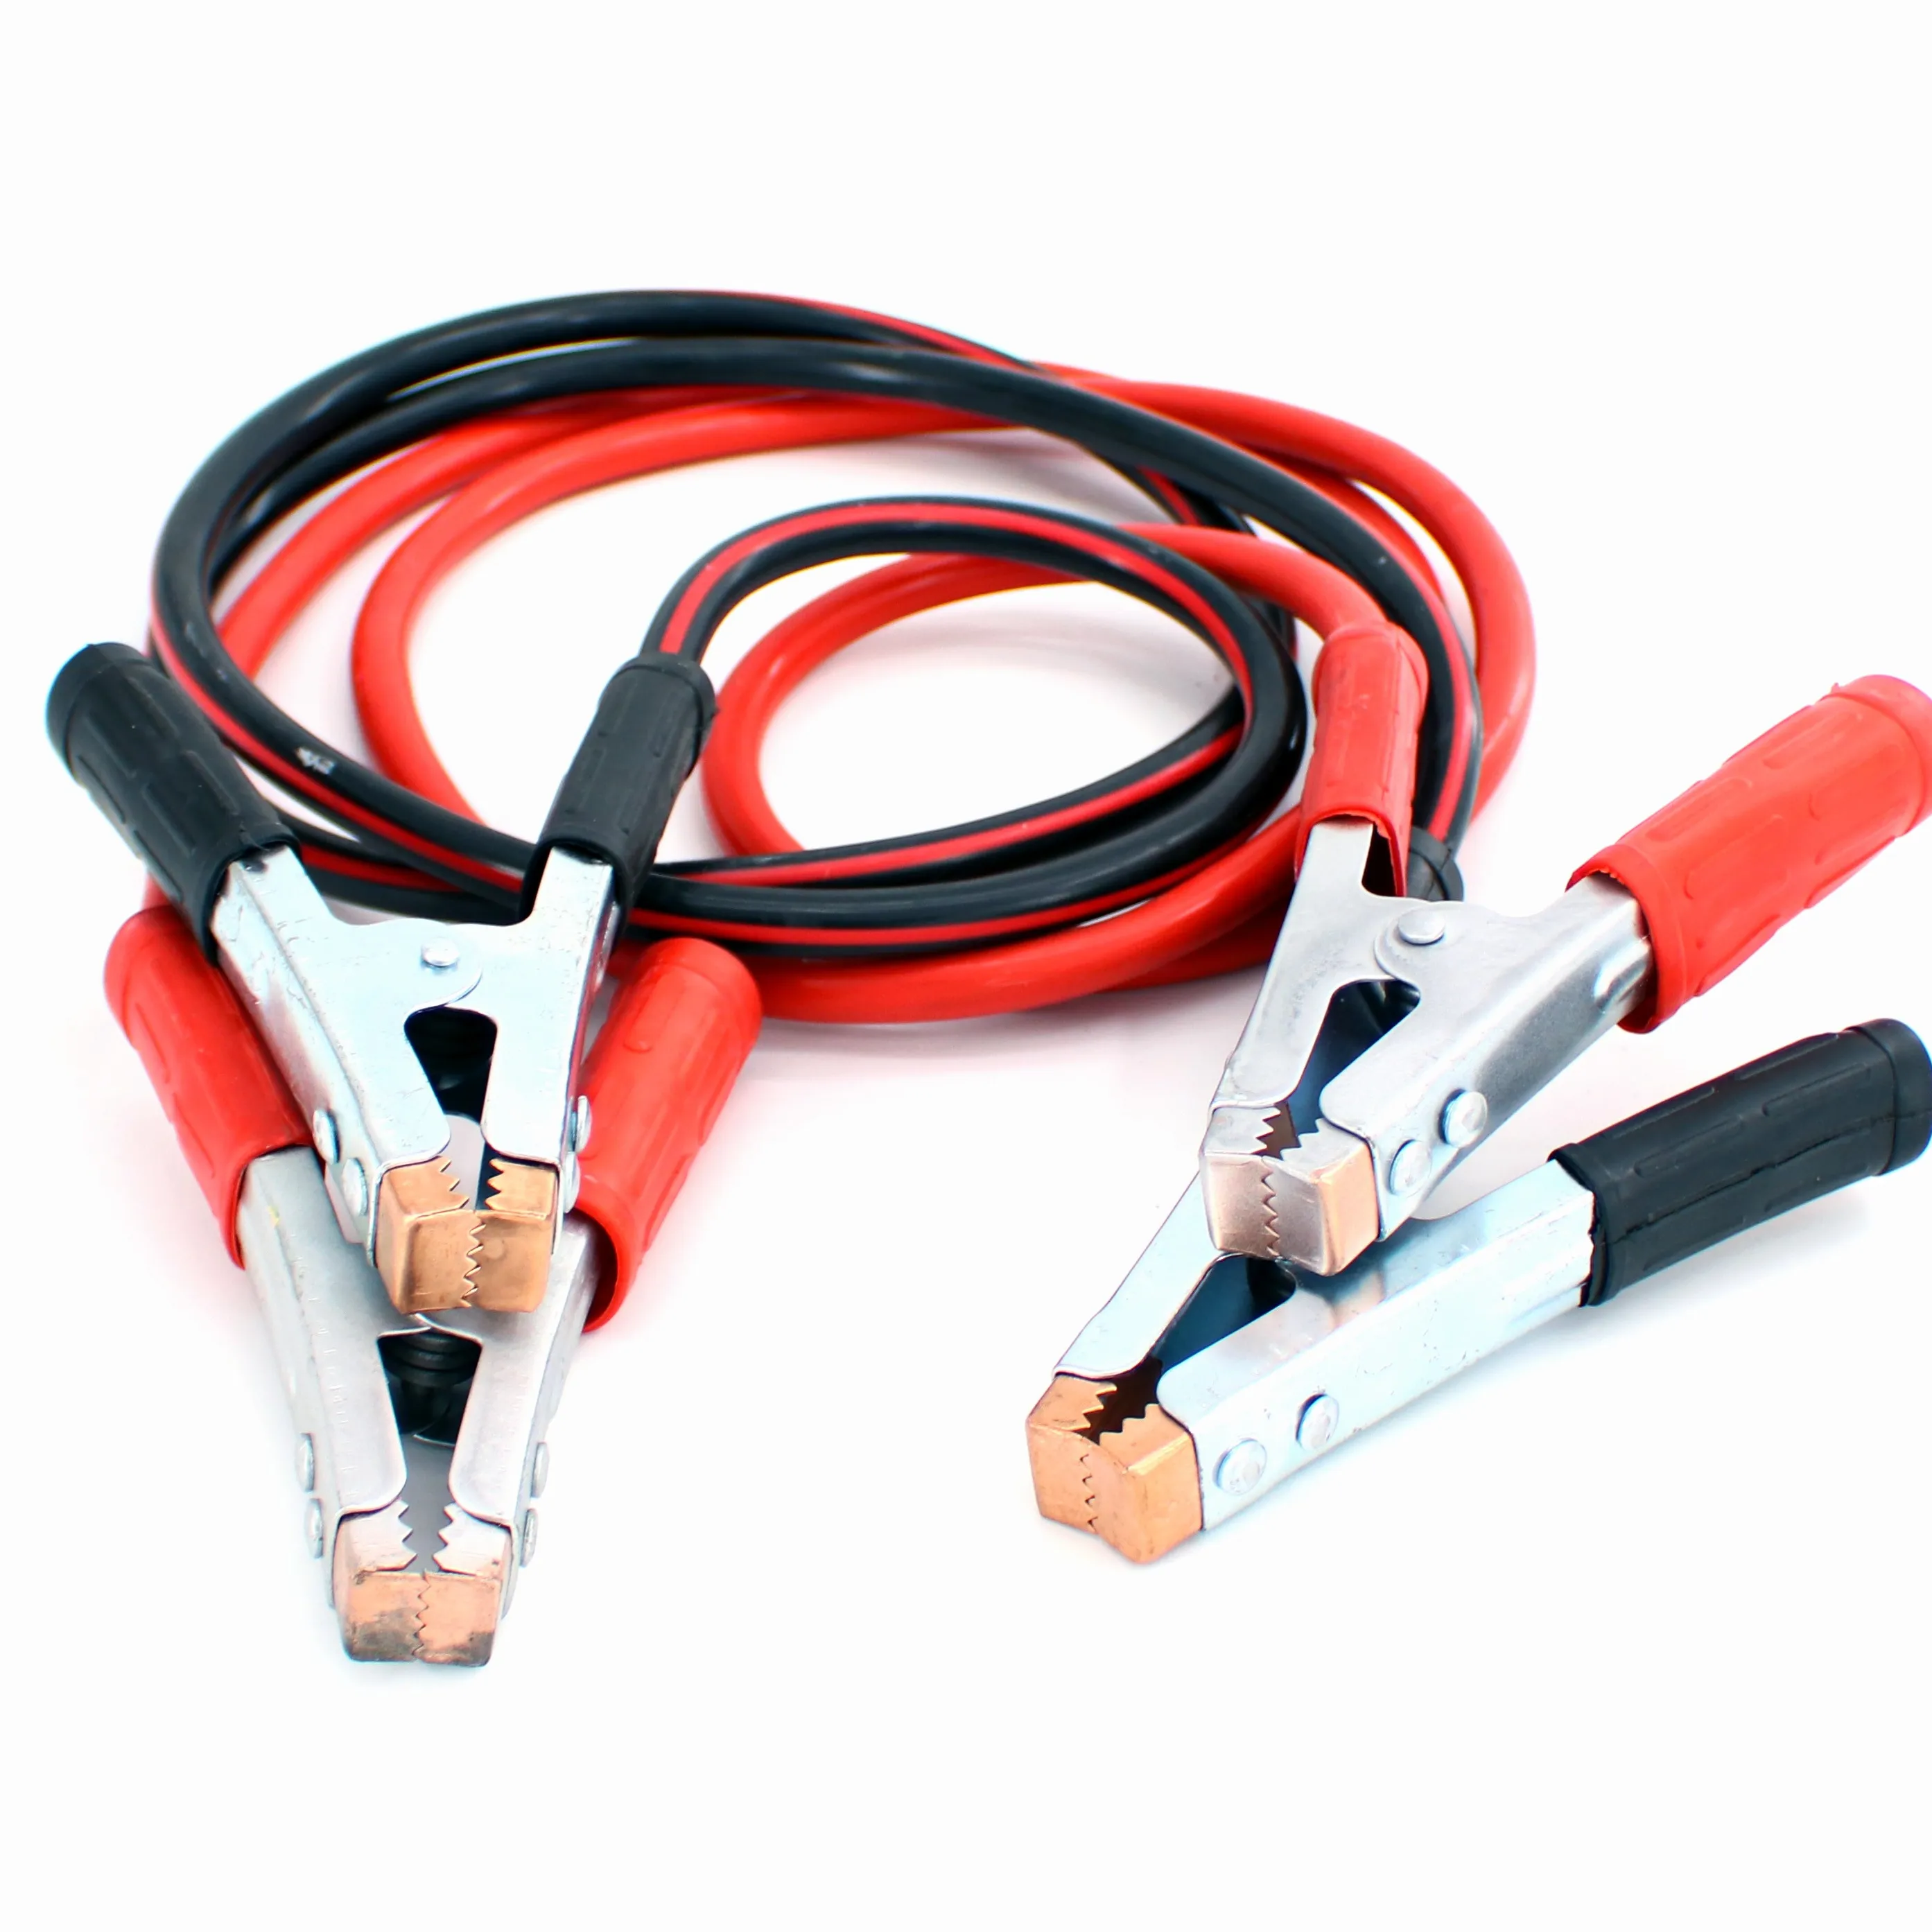 Portable Car Jump Starter Auto Battery Booster Charger With Smart Jumper Cables